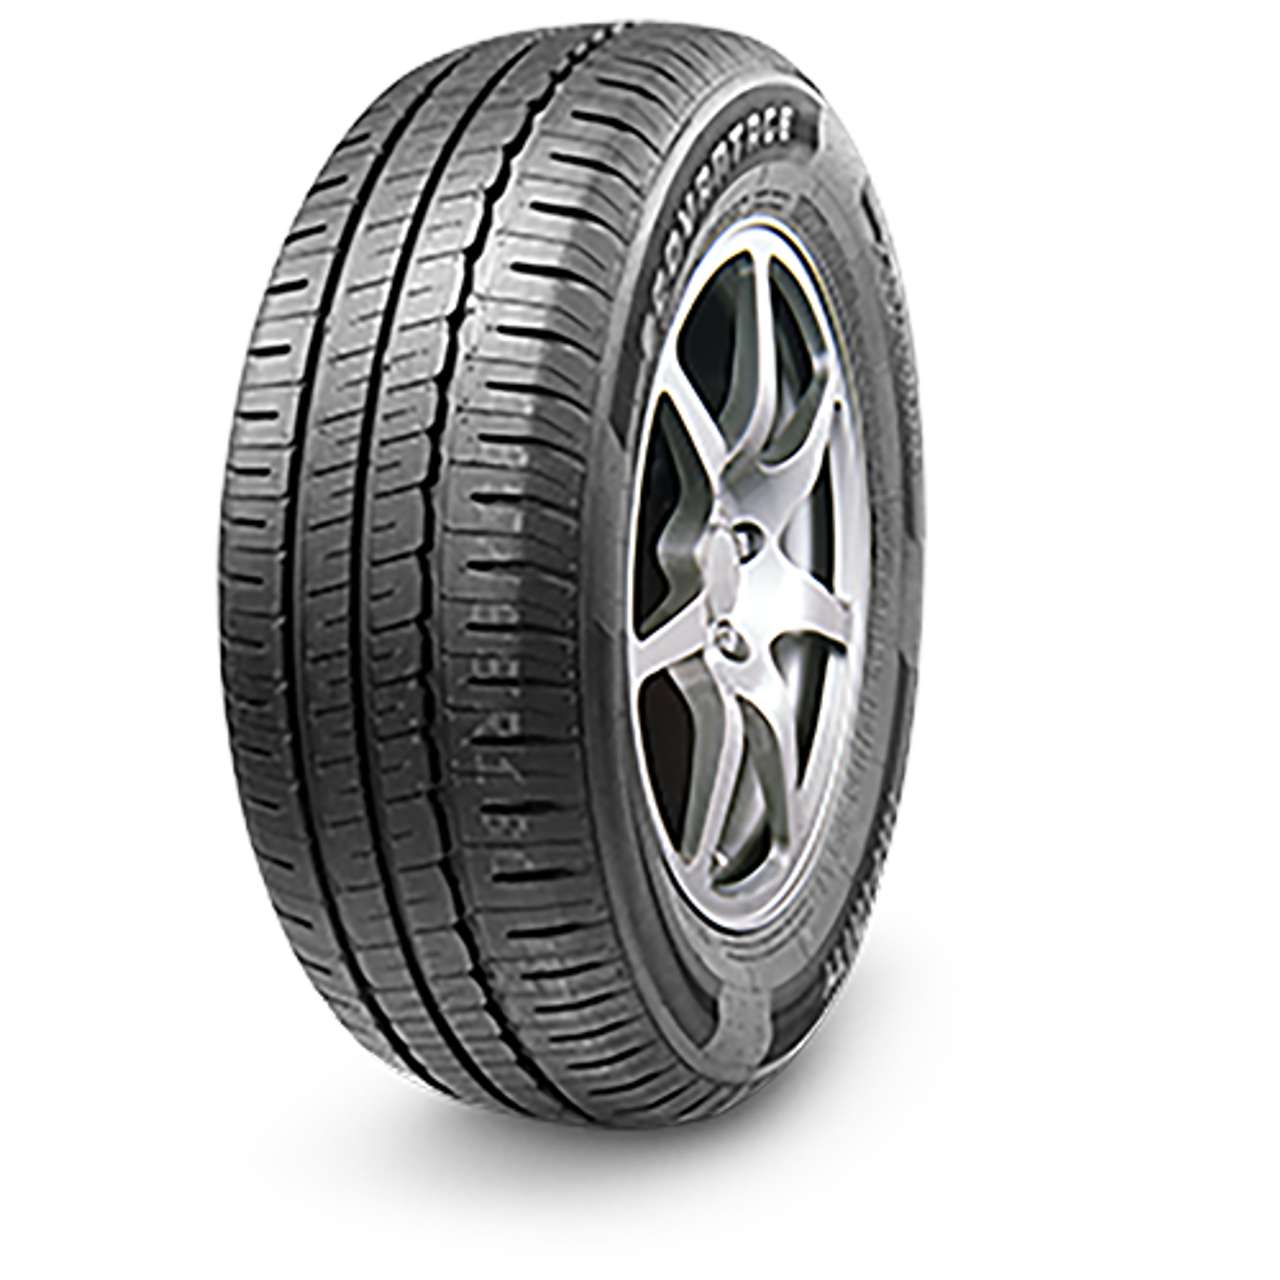 LINGLONG GREEN-MAX WINTER ICE I-15 205/60R16 96T NORDIC COMPOUND BSW XL